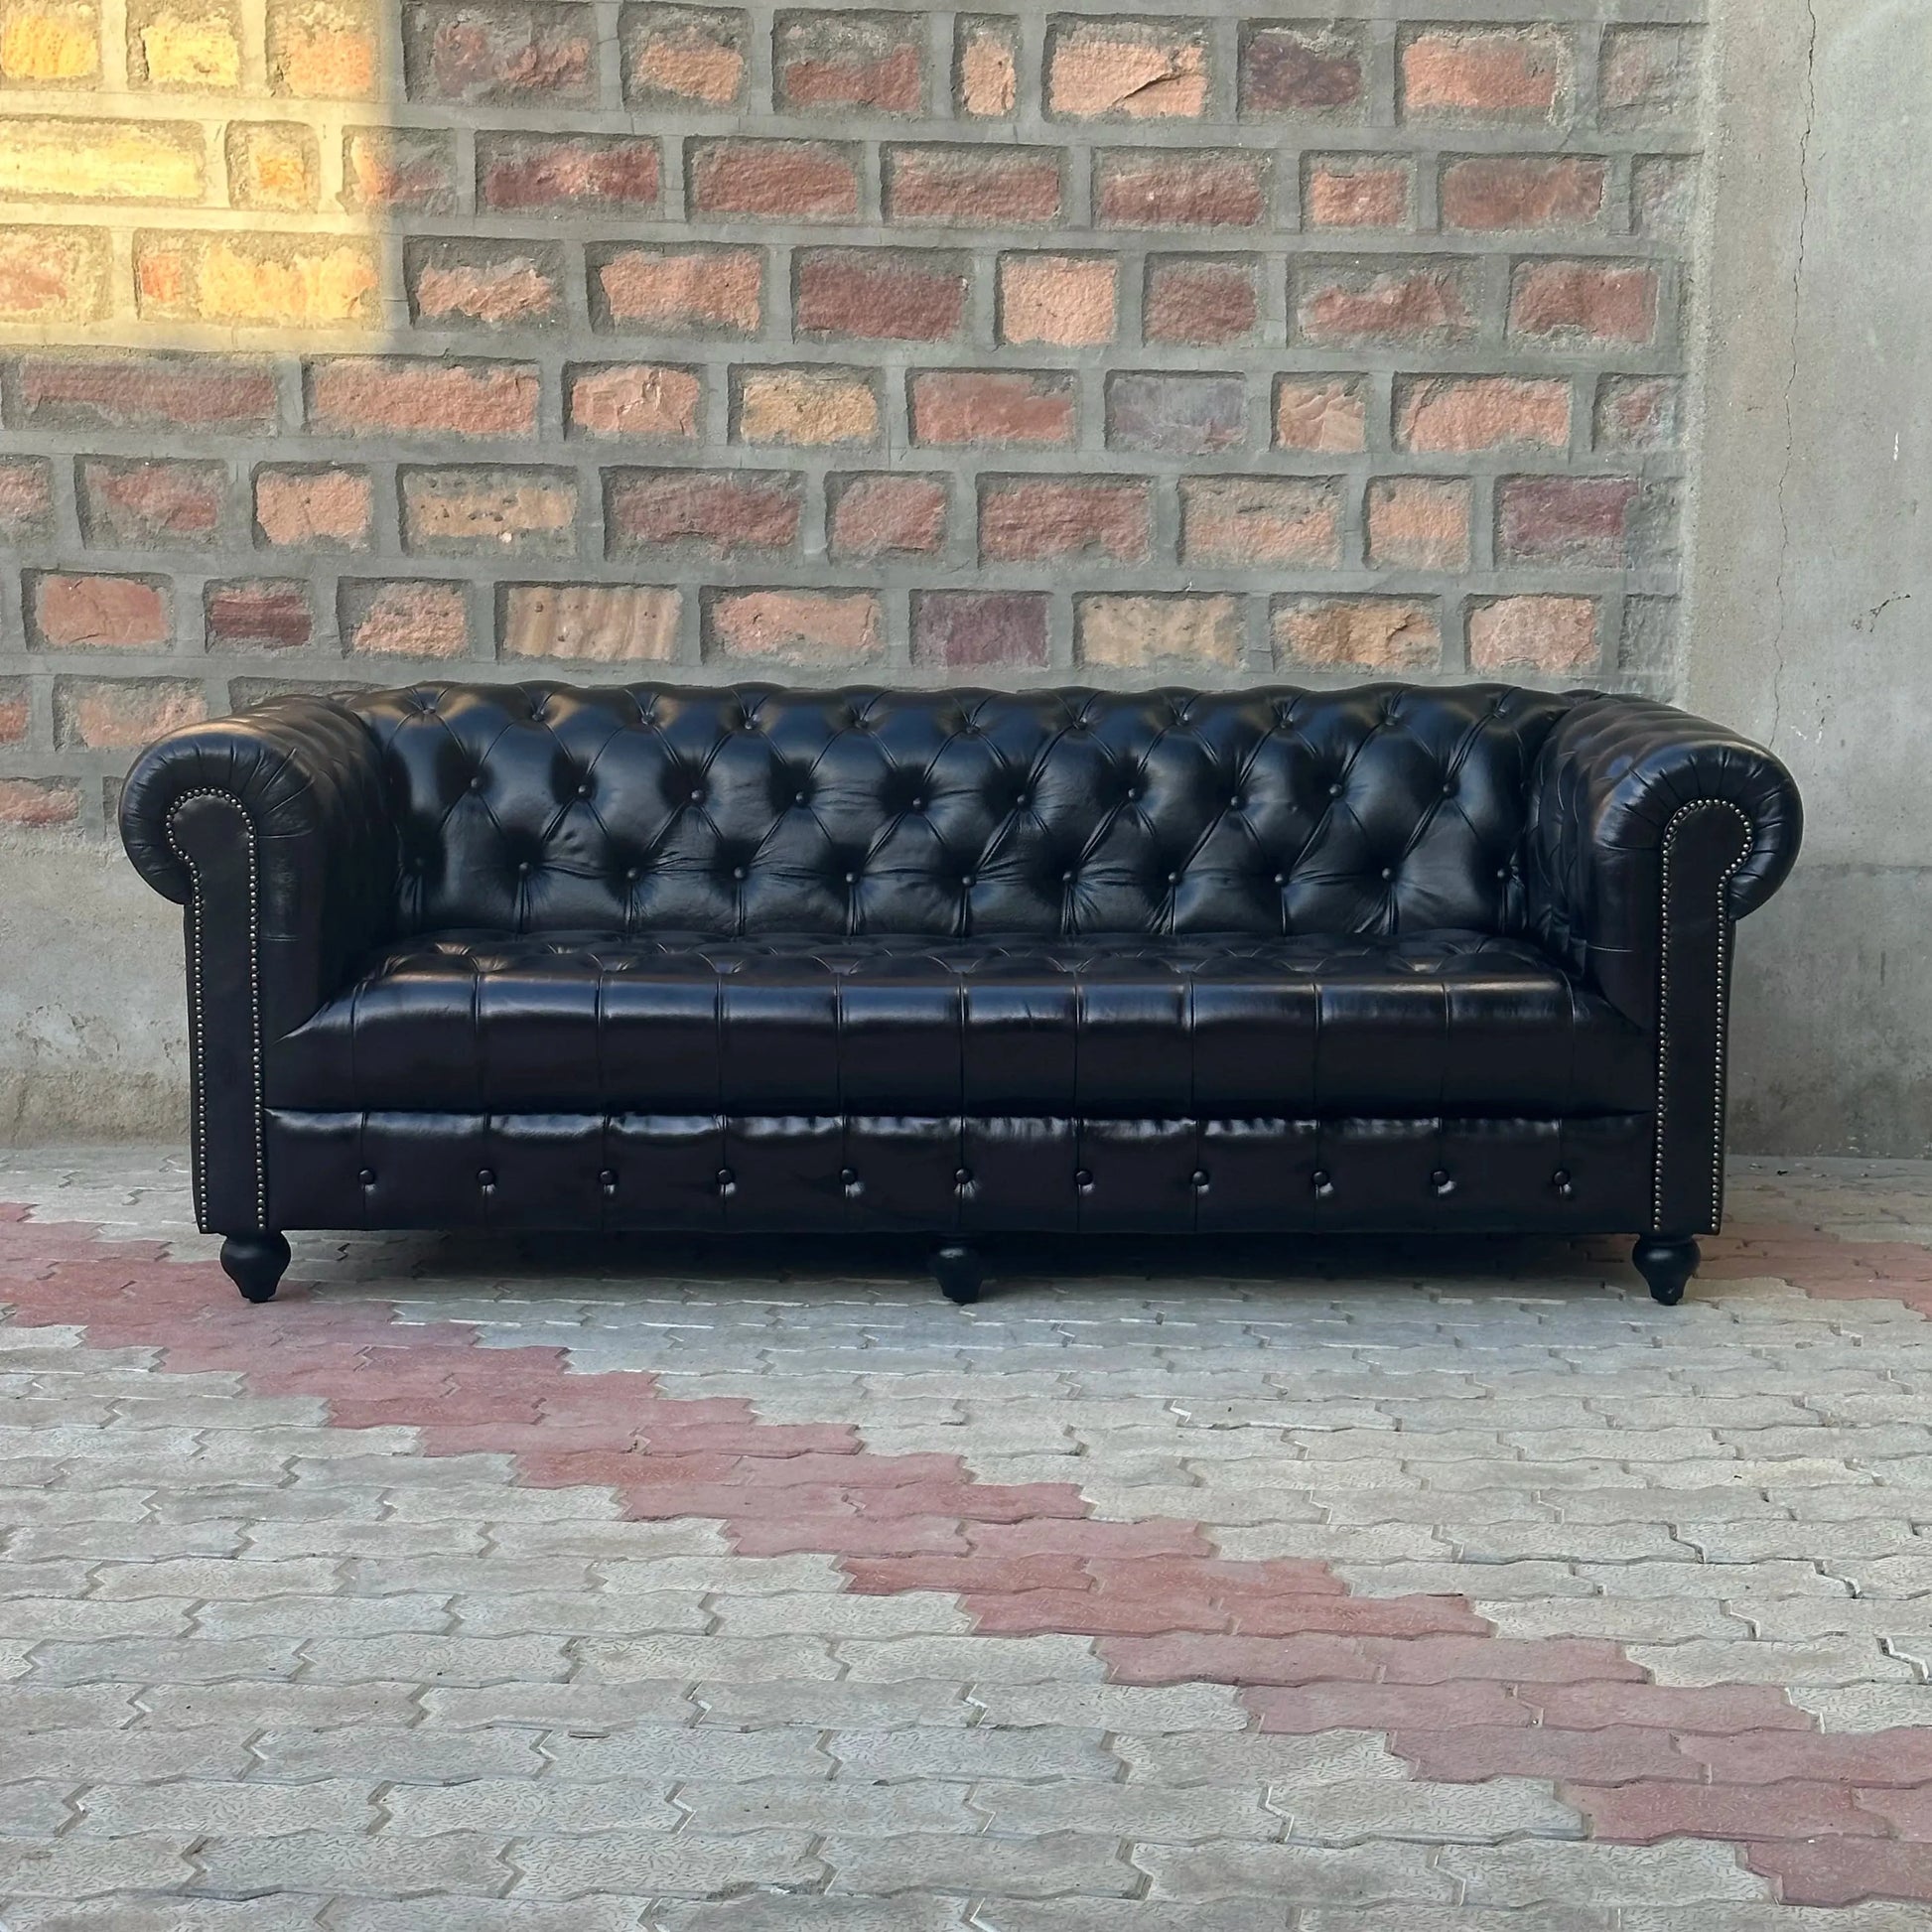 87" Sofa Tufted Bench | Brooklyn Chesterfield Leather Sofa with Tufted Bench Seat (BR-3T) by Rising Tide Design Co.